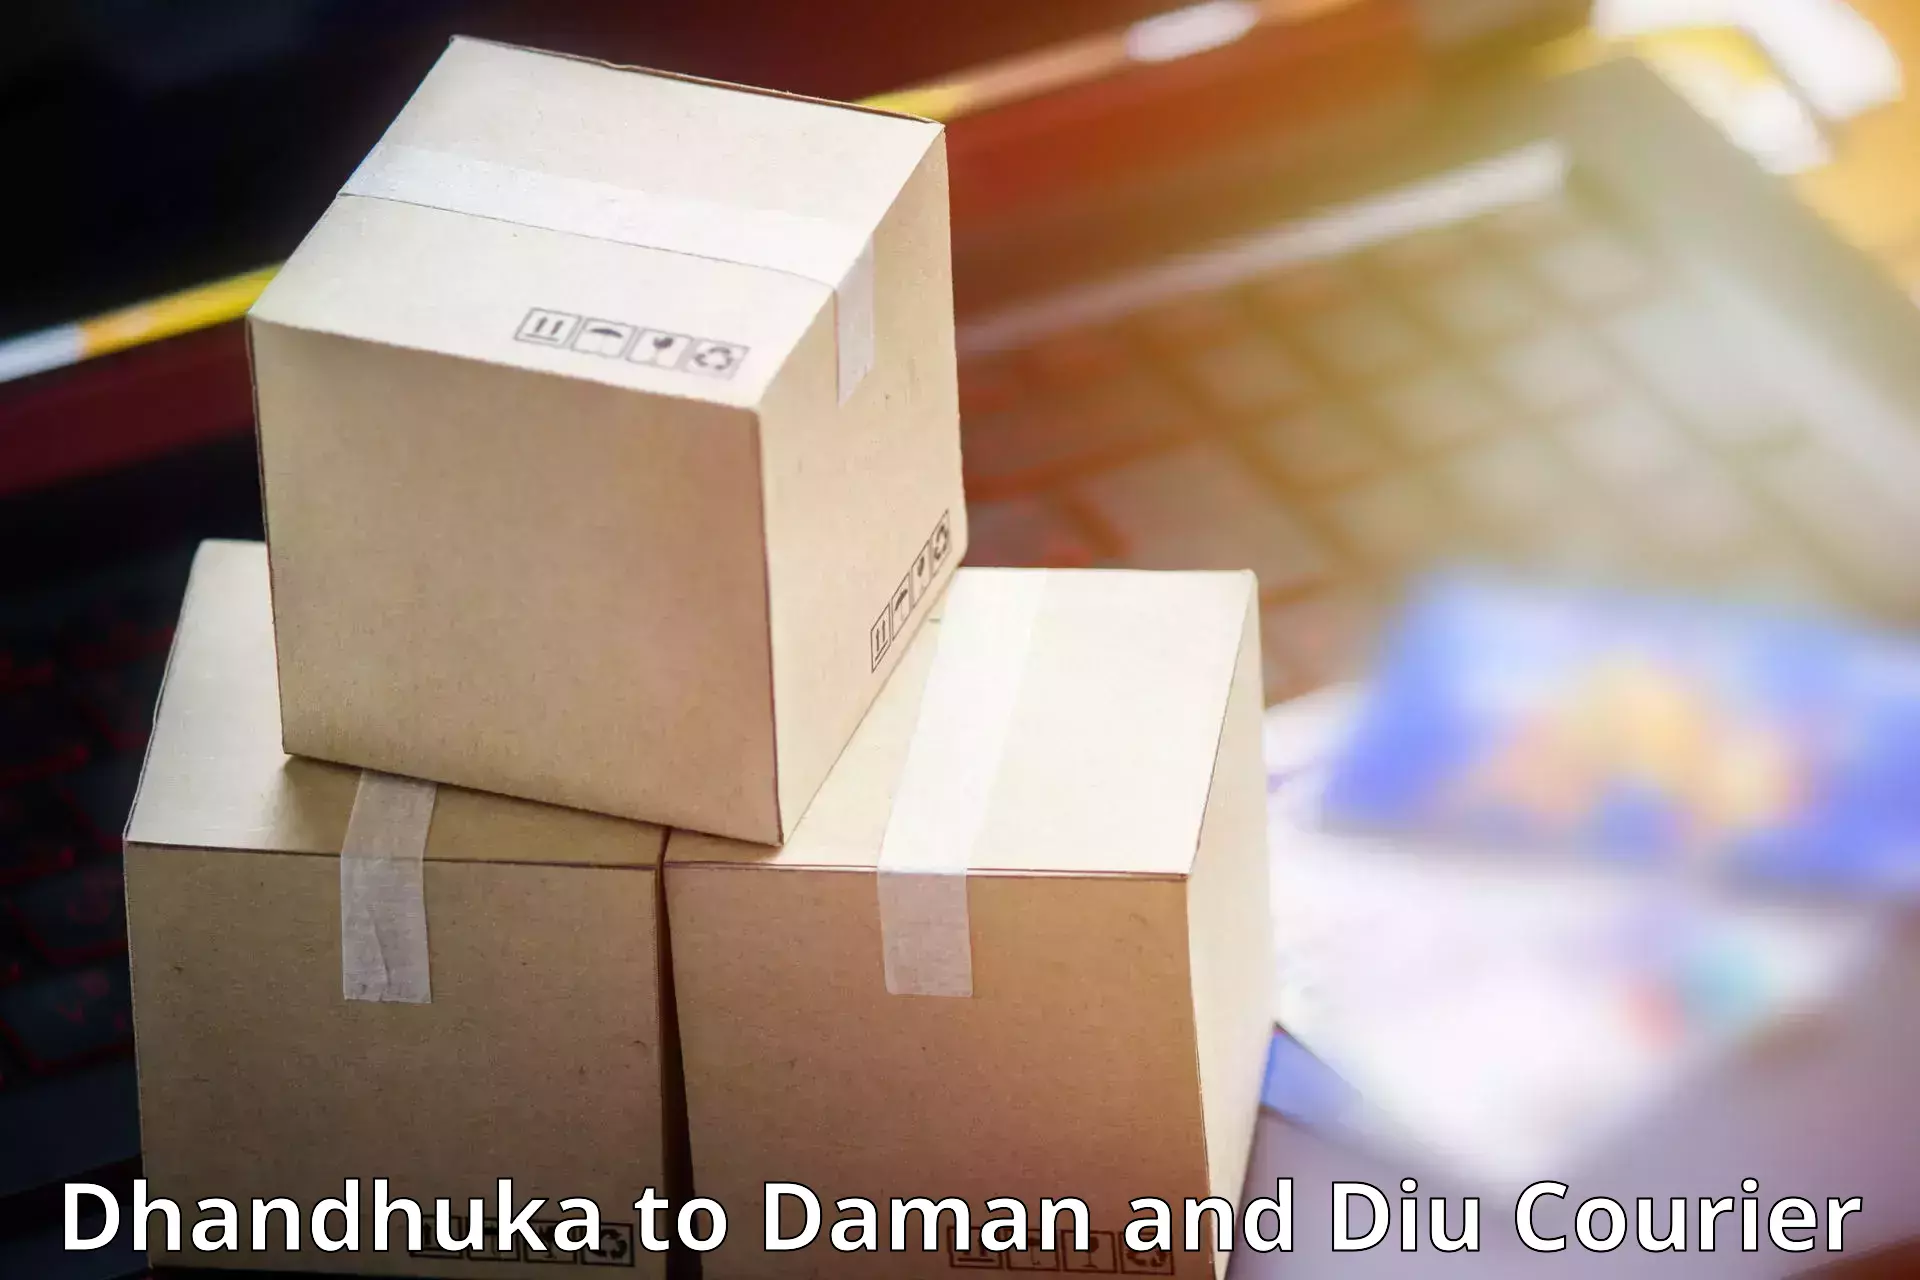 Full-service courier options in Dhandhuka to Daman